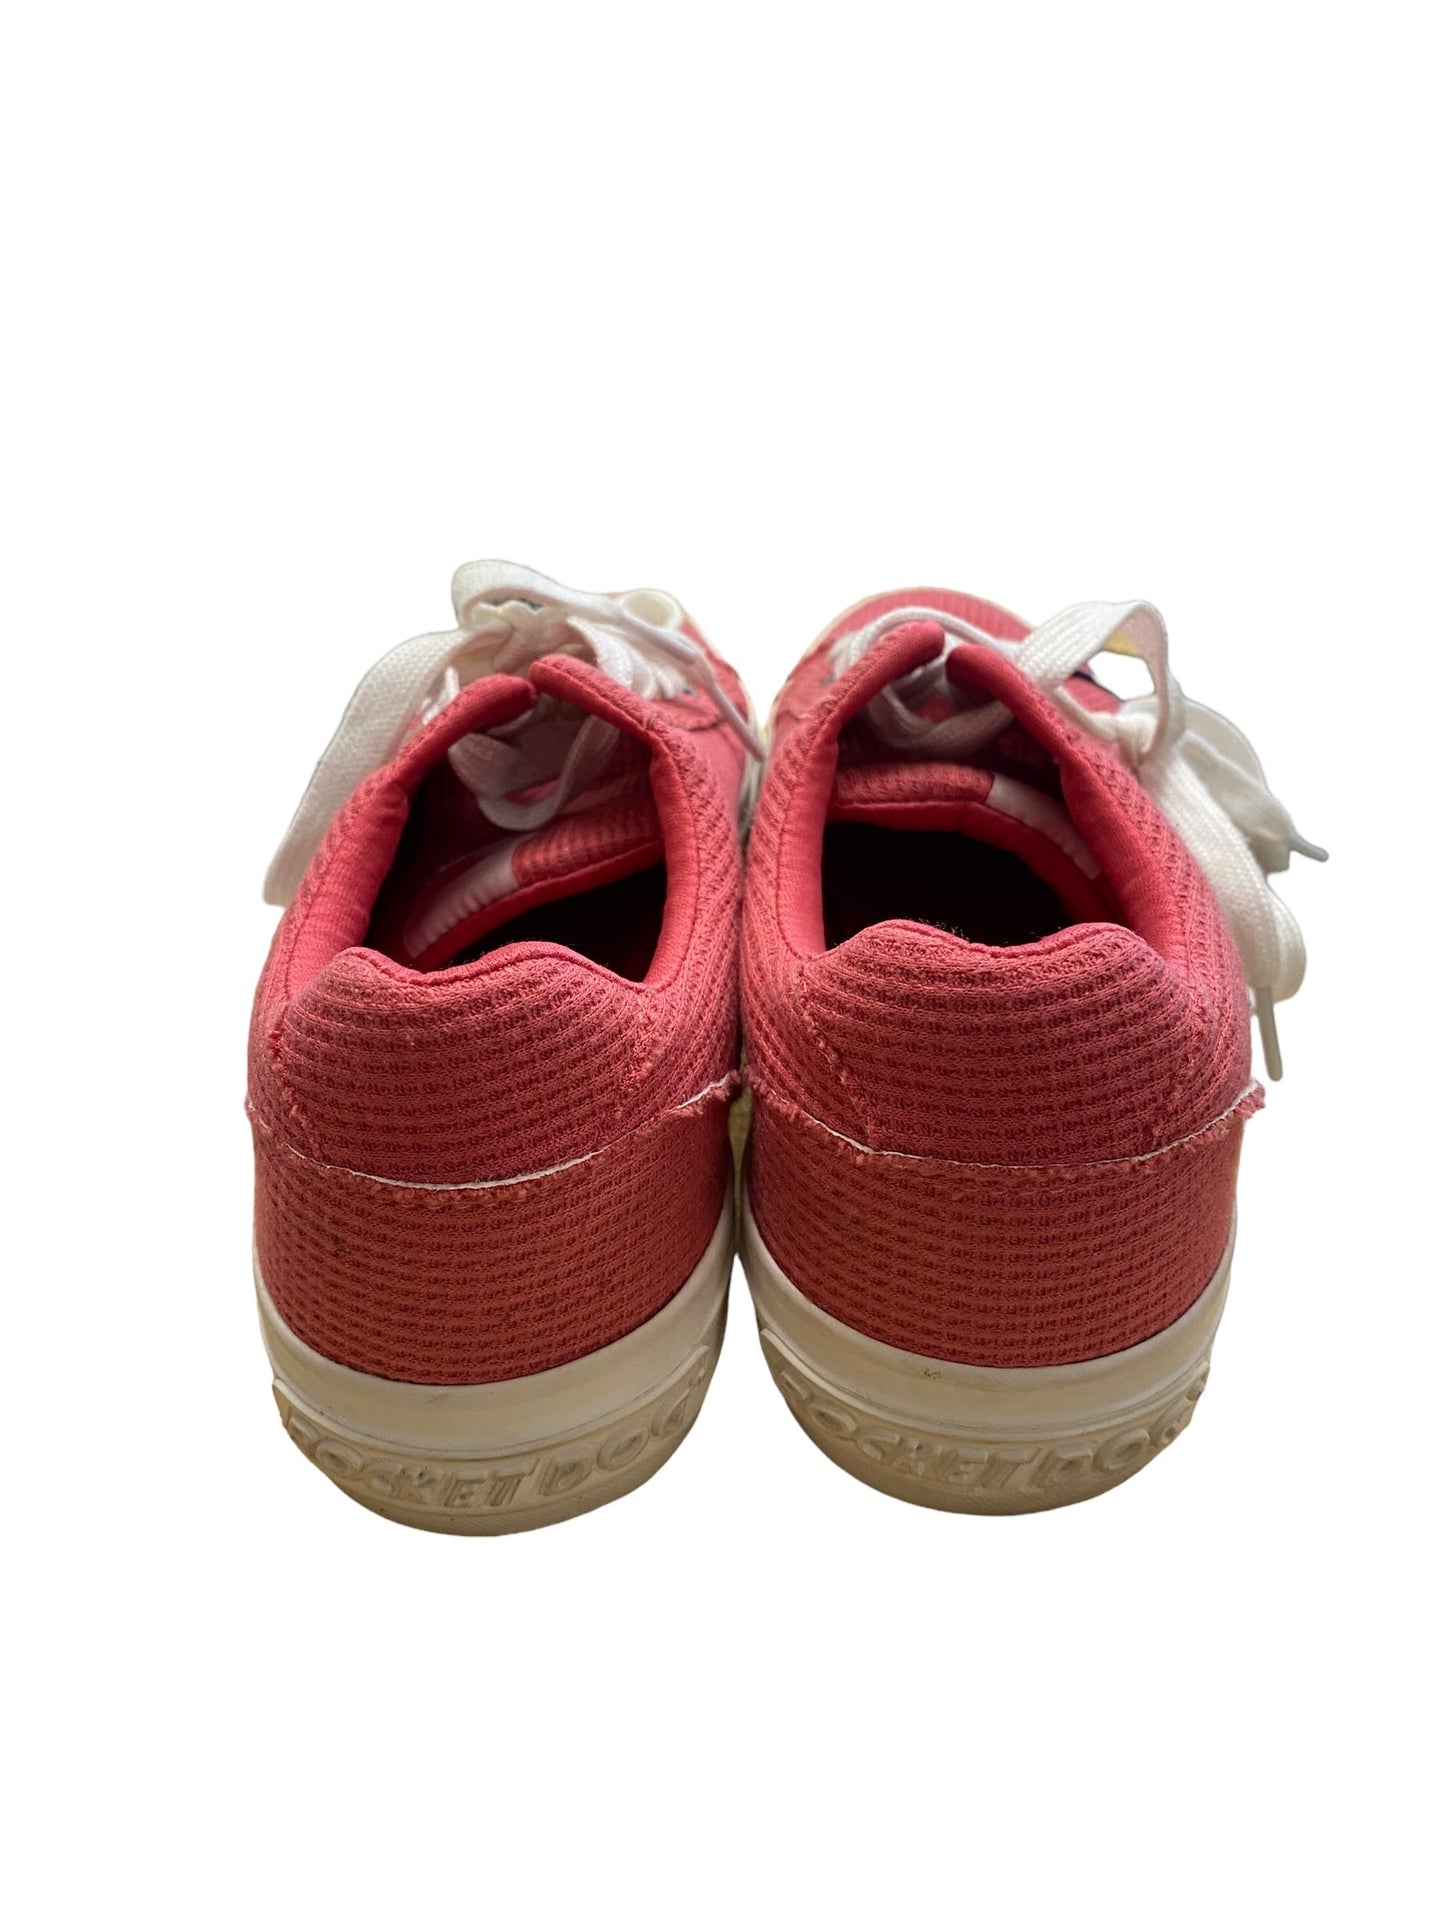 Pink Shoes Sneakers Rocket Dogs, Size 8